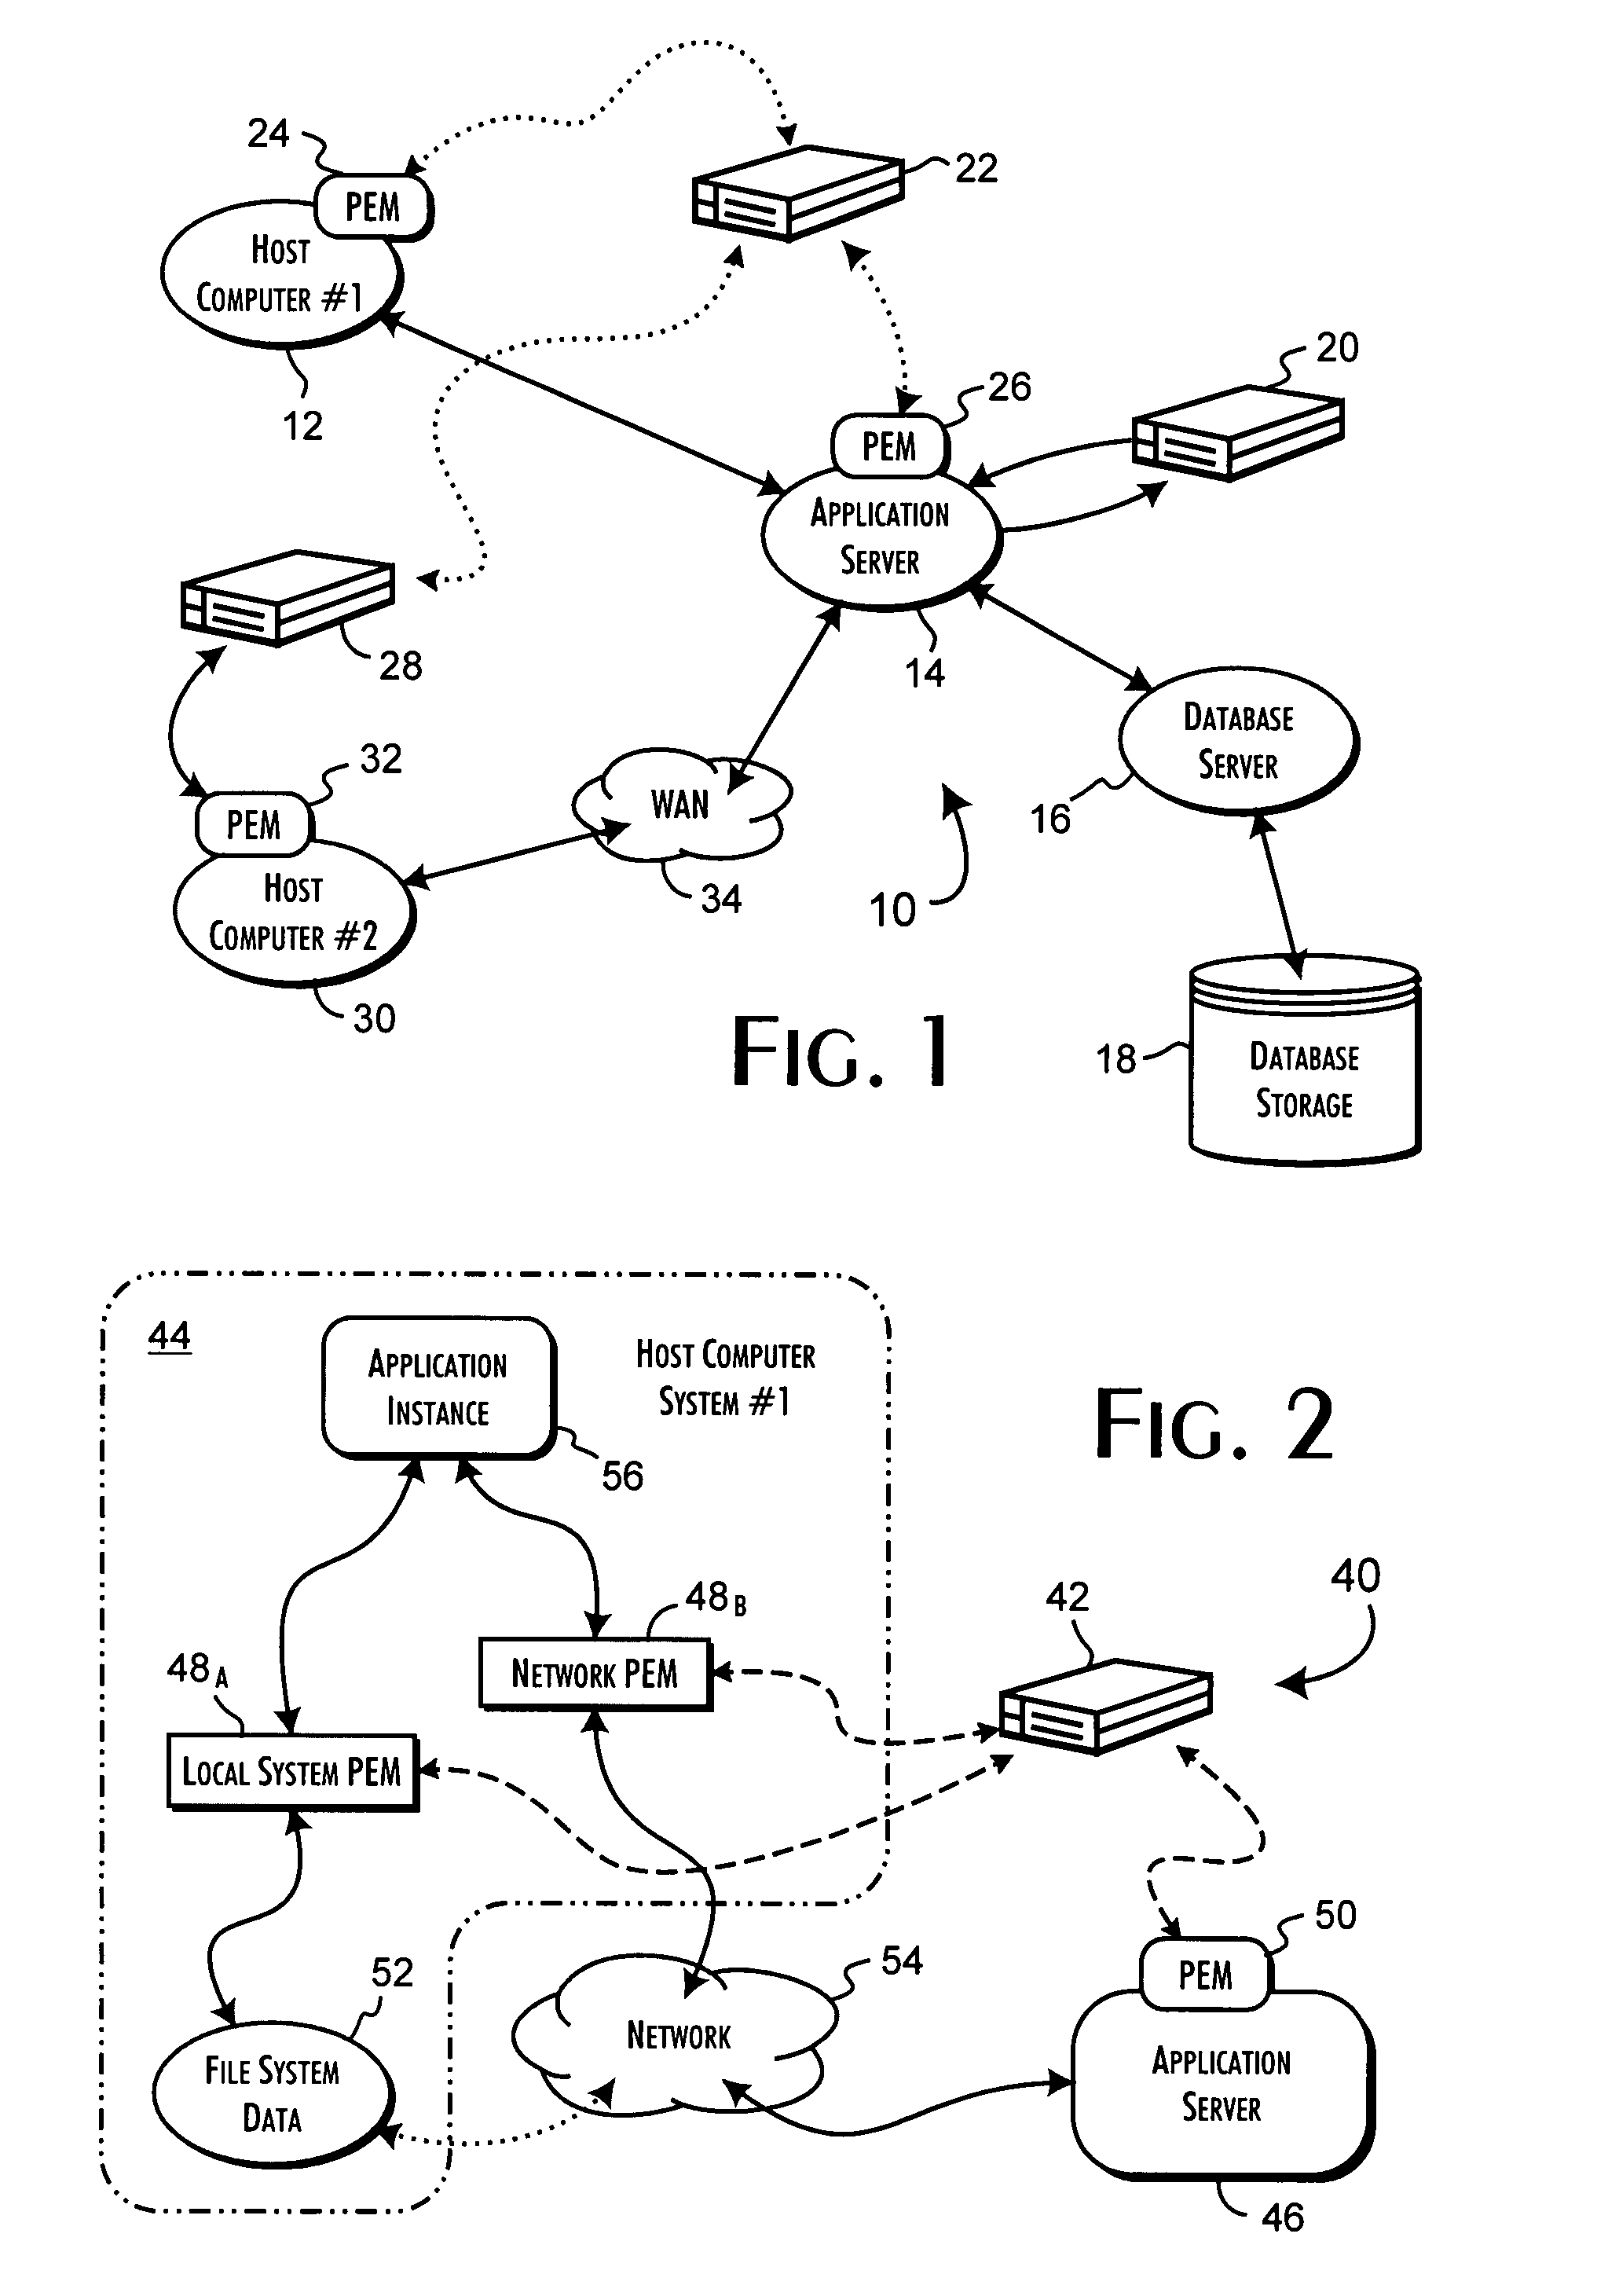 Secure, real-time application execution control system and methods